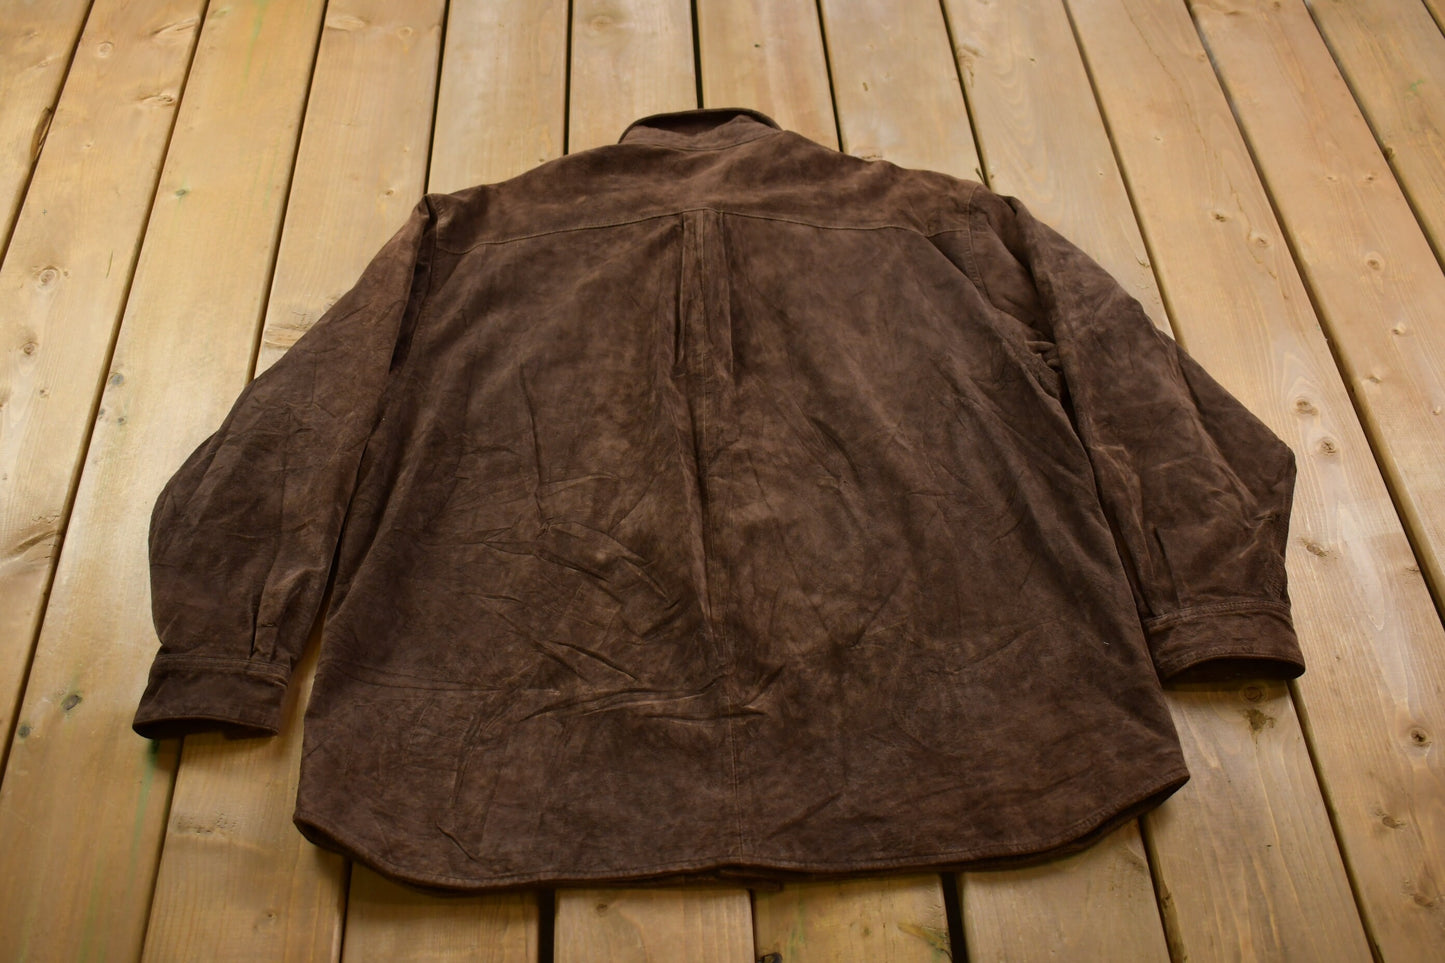 Vintage 1990s Leather Button Up Jacket / Fall Outerwear / Leather Coat / Winter Outerwear / Streetwear Fashion / Suede Jacket